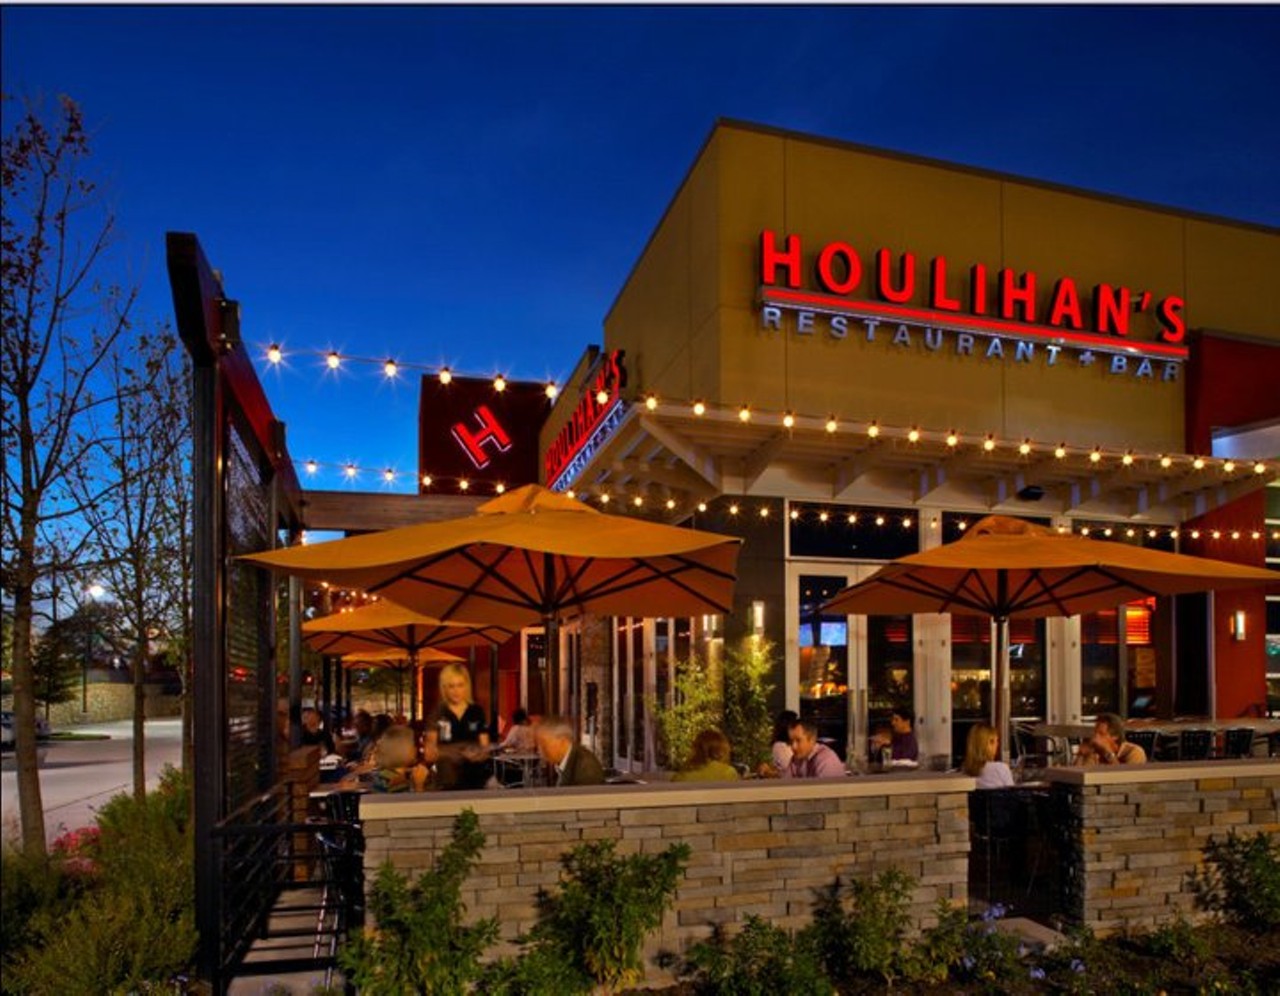 Sign up for Houlihan's online club and get a free entree on your birthday.